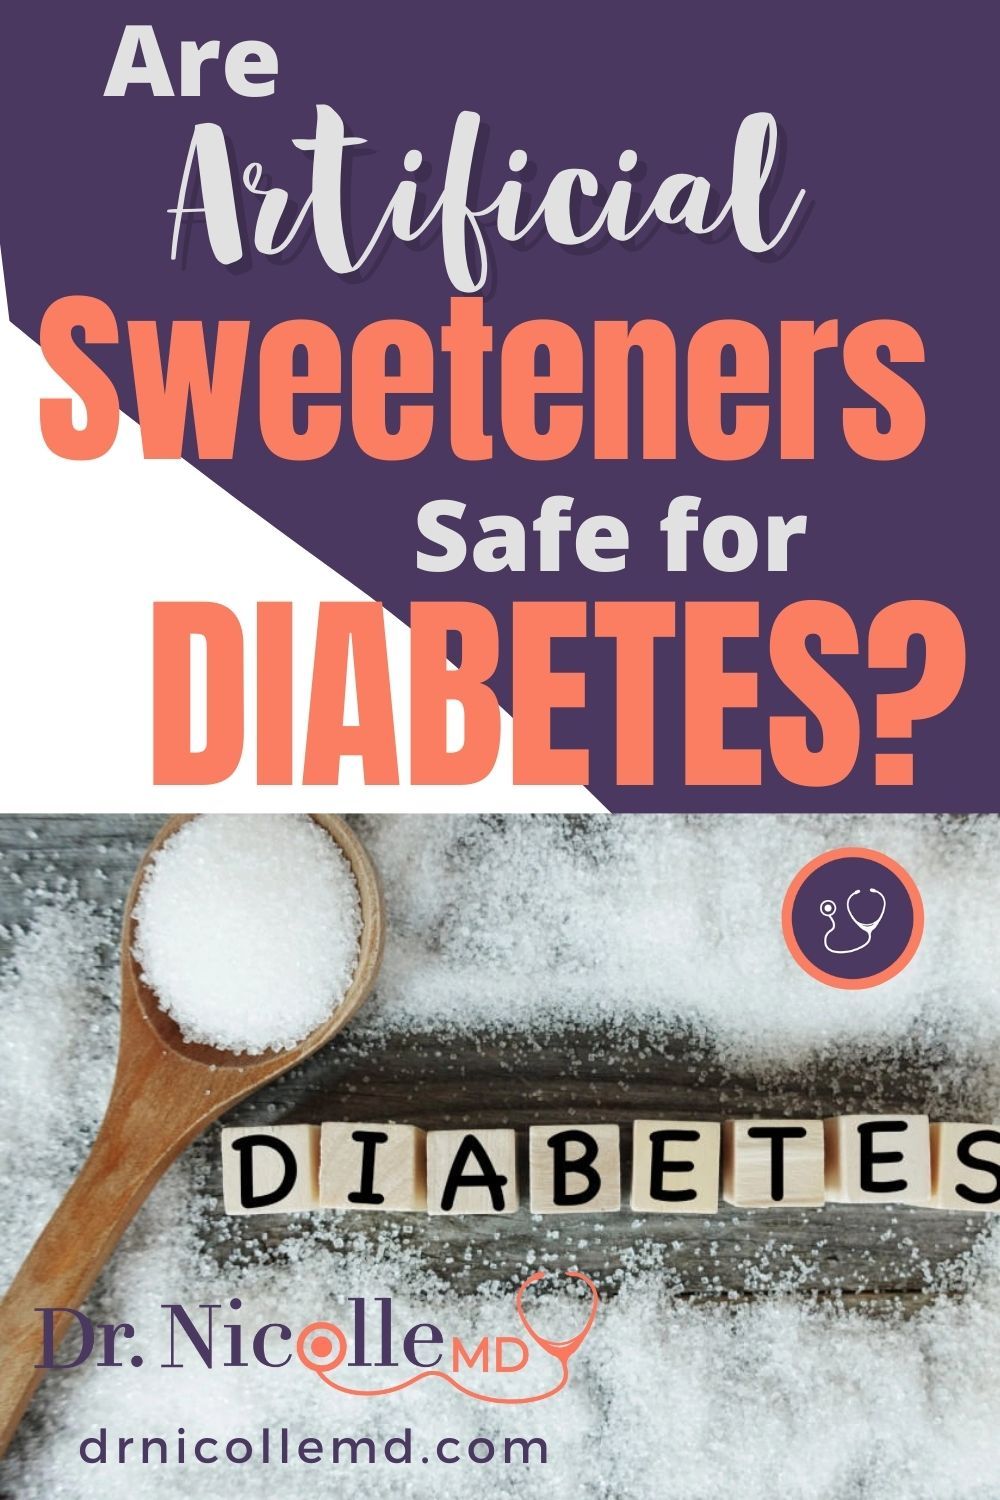 Are Artificial Sweeteners Safe for Diabetics?